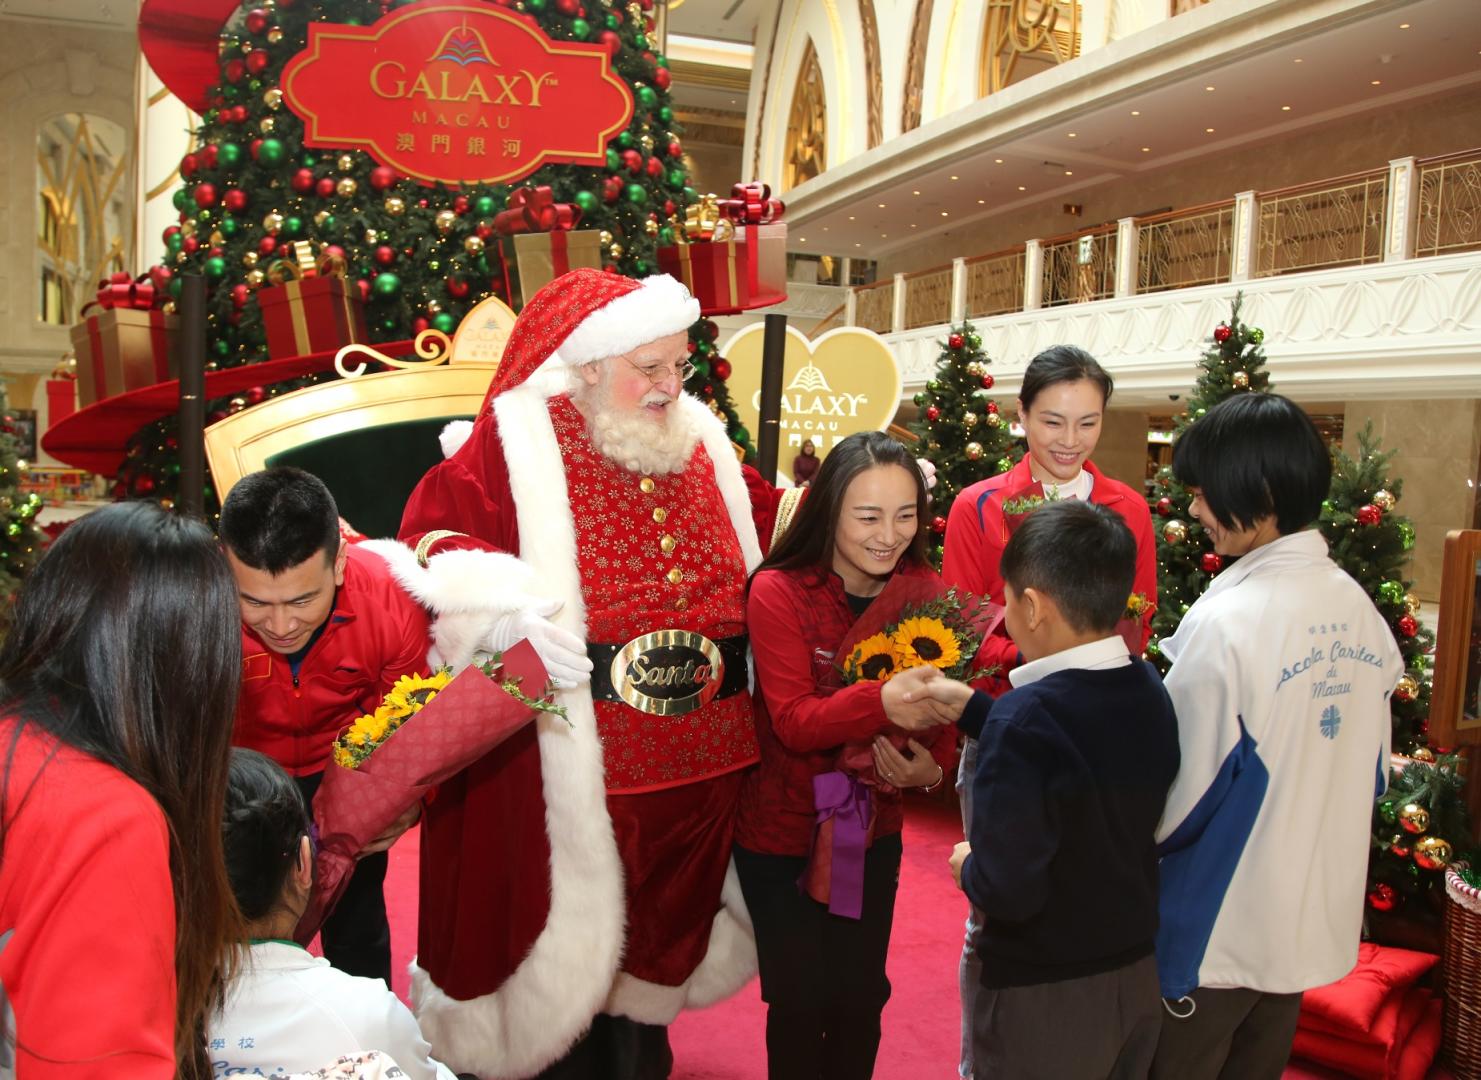 On the afternoon of December 11, the three Chinese gold medalists including Wu Minxia, Han Xiaopeng and Li Nina arrived at Santa’s Grotto in Galaxy Macau’s East Square, where students from Escola Caritas de Macau welcomed them with bouquets of flowers.